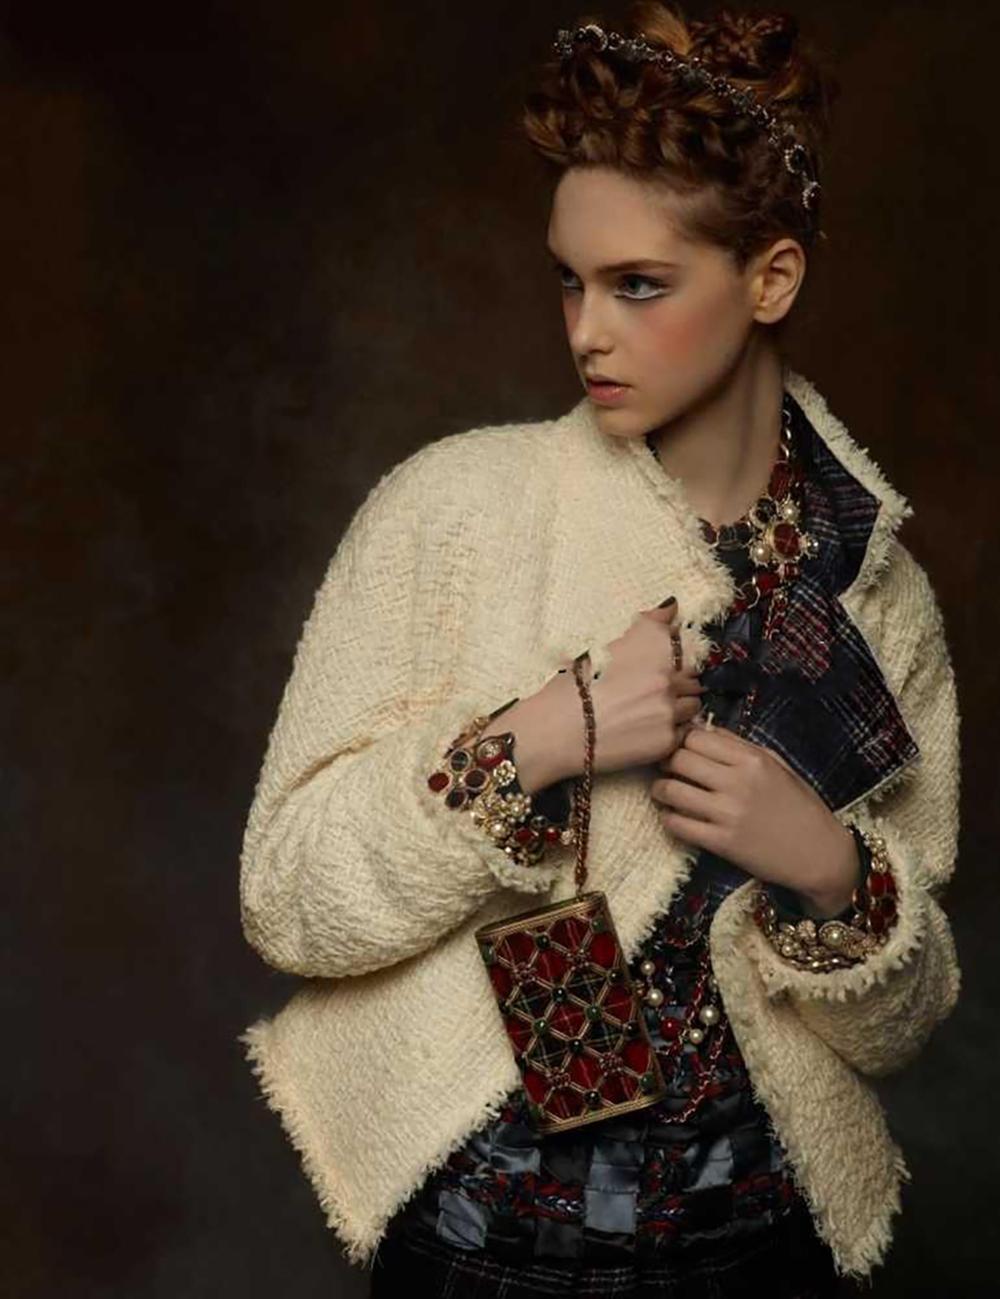 Most recognisable Chanel tweed jacket with tartan trim from Runway of Paris / EDINBURGH 2013 Pre-fall collection, 13a
As seen on Catwalk, in Ad Campaign and in many magazines!
Size mark 42 fr. Condition is pristine, never has been worn.
- CC logo